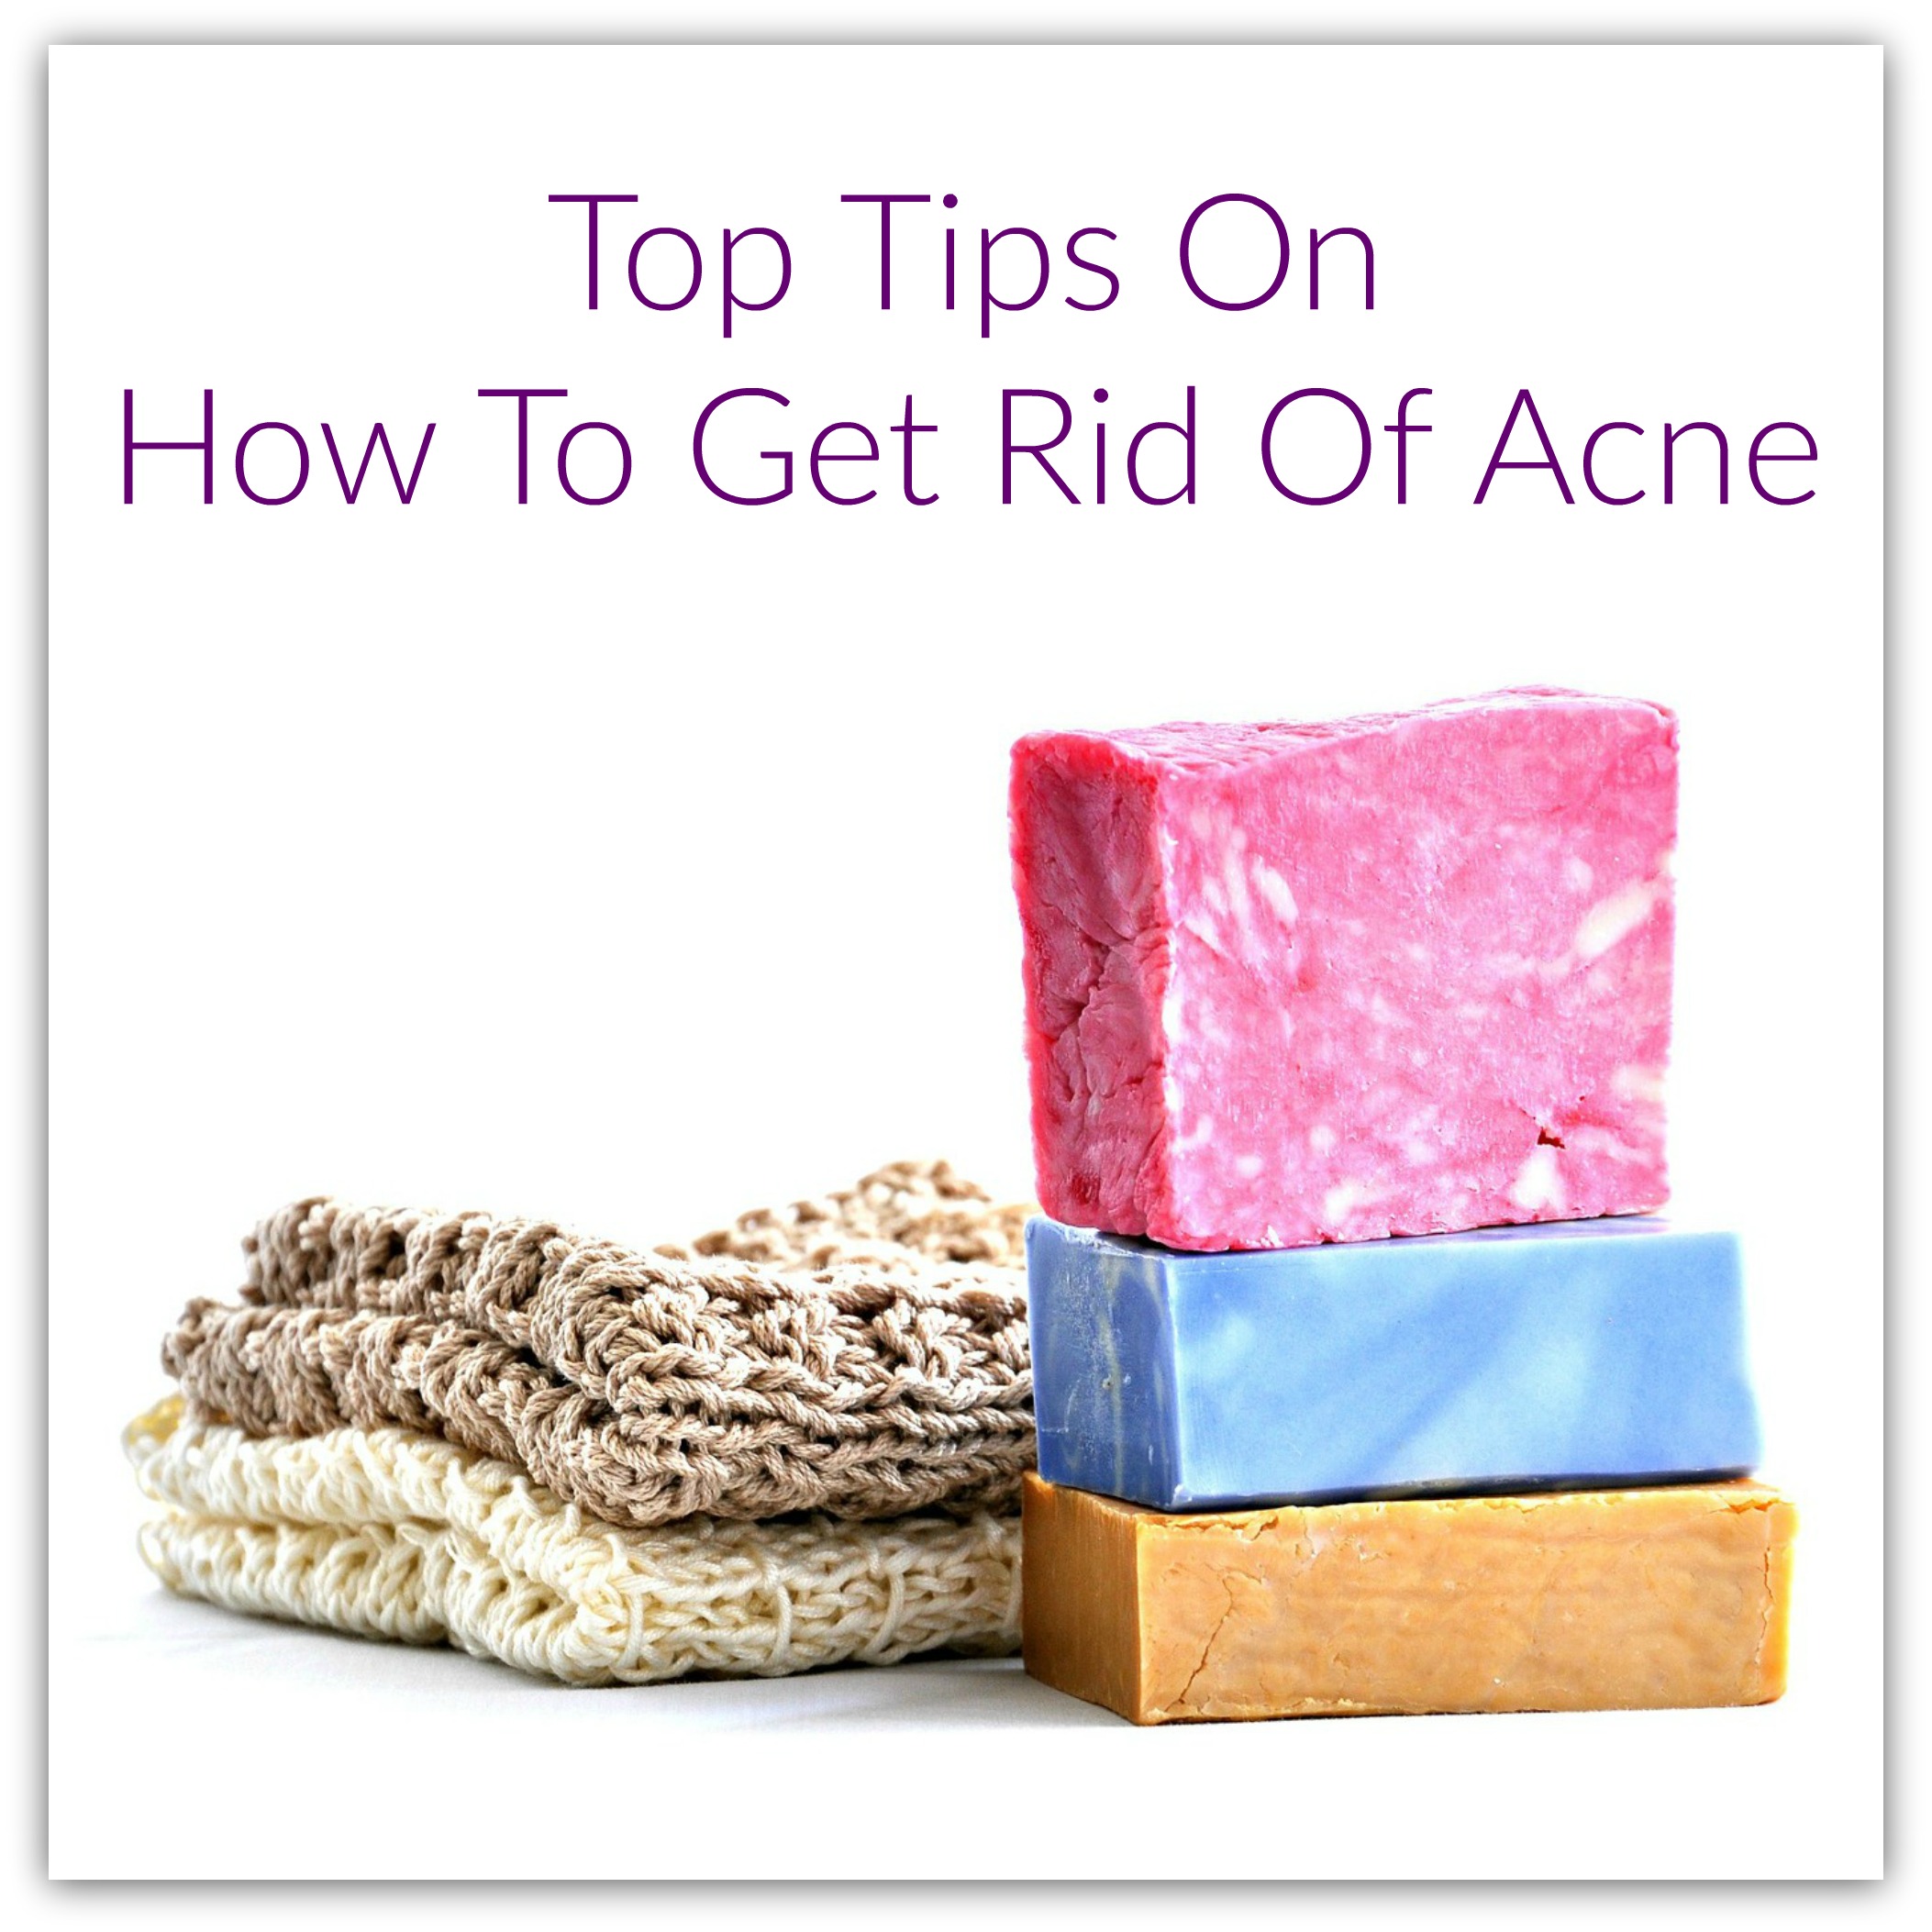 Top Tips On How To Get Rid Of Acne